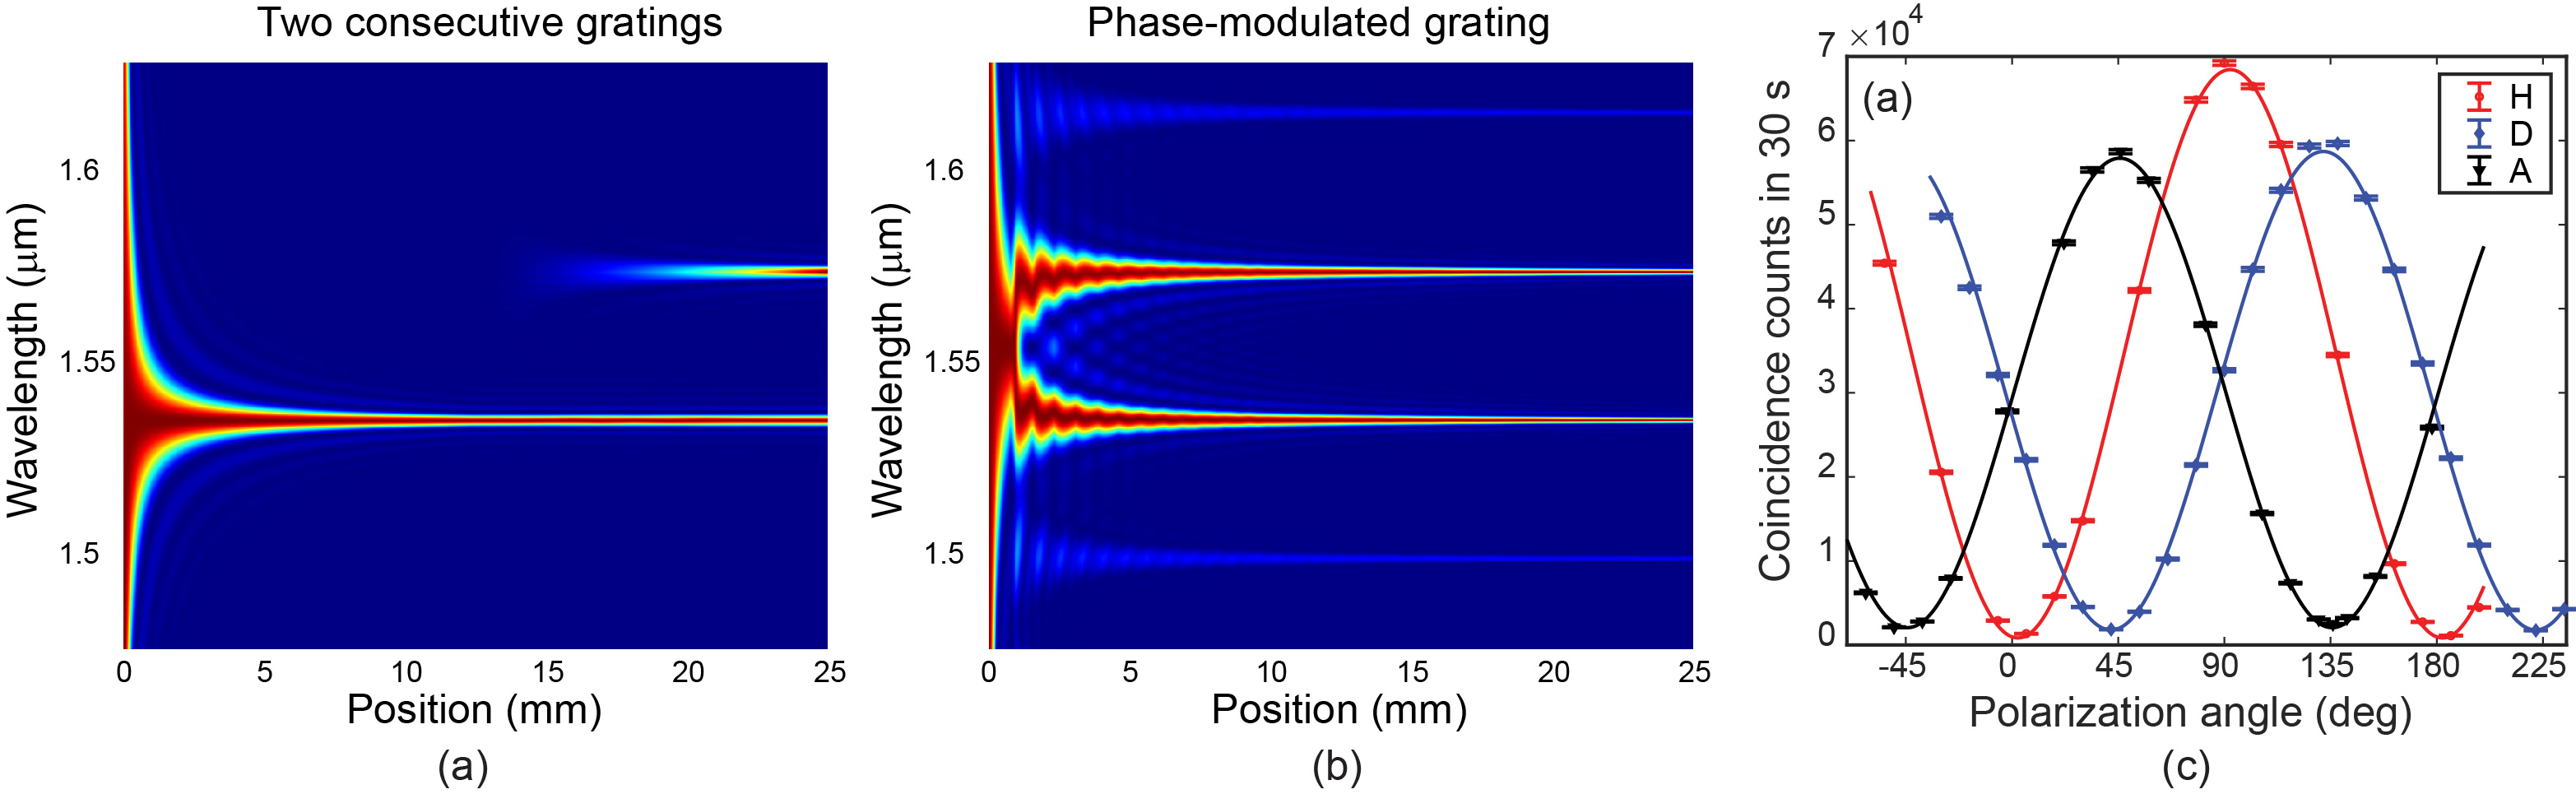 Figure 4. Normalized SPDC intensity of the horizontally polarized beam for (a) two consecutive PPLN gratings and (b) a phase-modulated grating. In the latter, both downconversion processes occur simultaneously in a distributed fashion throughout the crystal. (c) Fixing the 1569 nm photon polarization to horizontal (H), diagonal (D) or anti-diagonal (A), we observed the coincidence counts while rotating a polarizer placed before the detector for the 1530 nm photons. There is good polarization entanglement vi